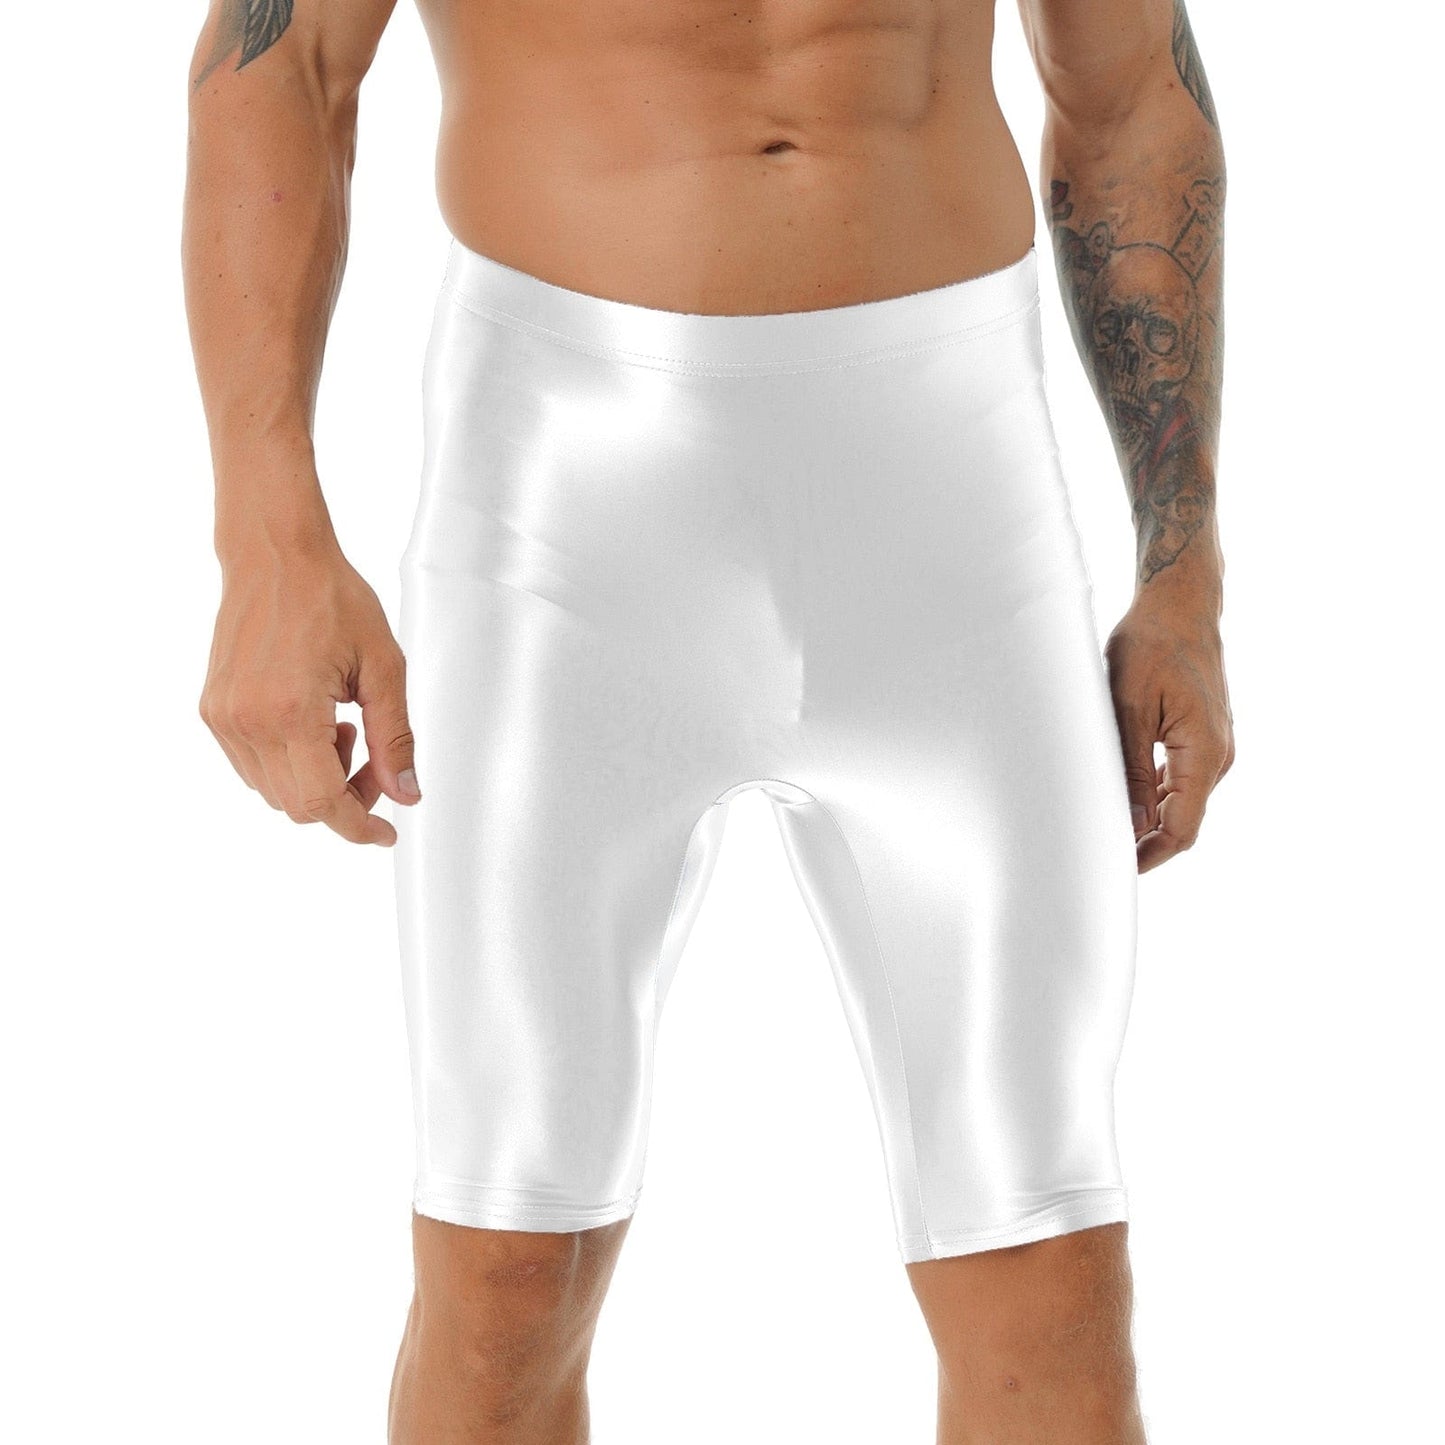 Kinky Cloth White / M / 1pc Mens Glossy Swimsuit Shorts